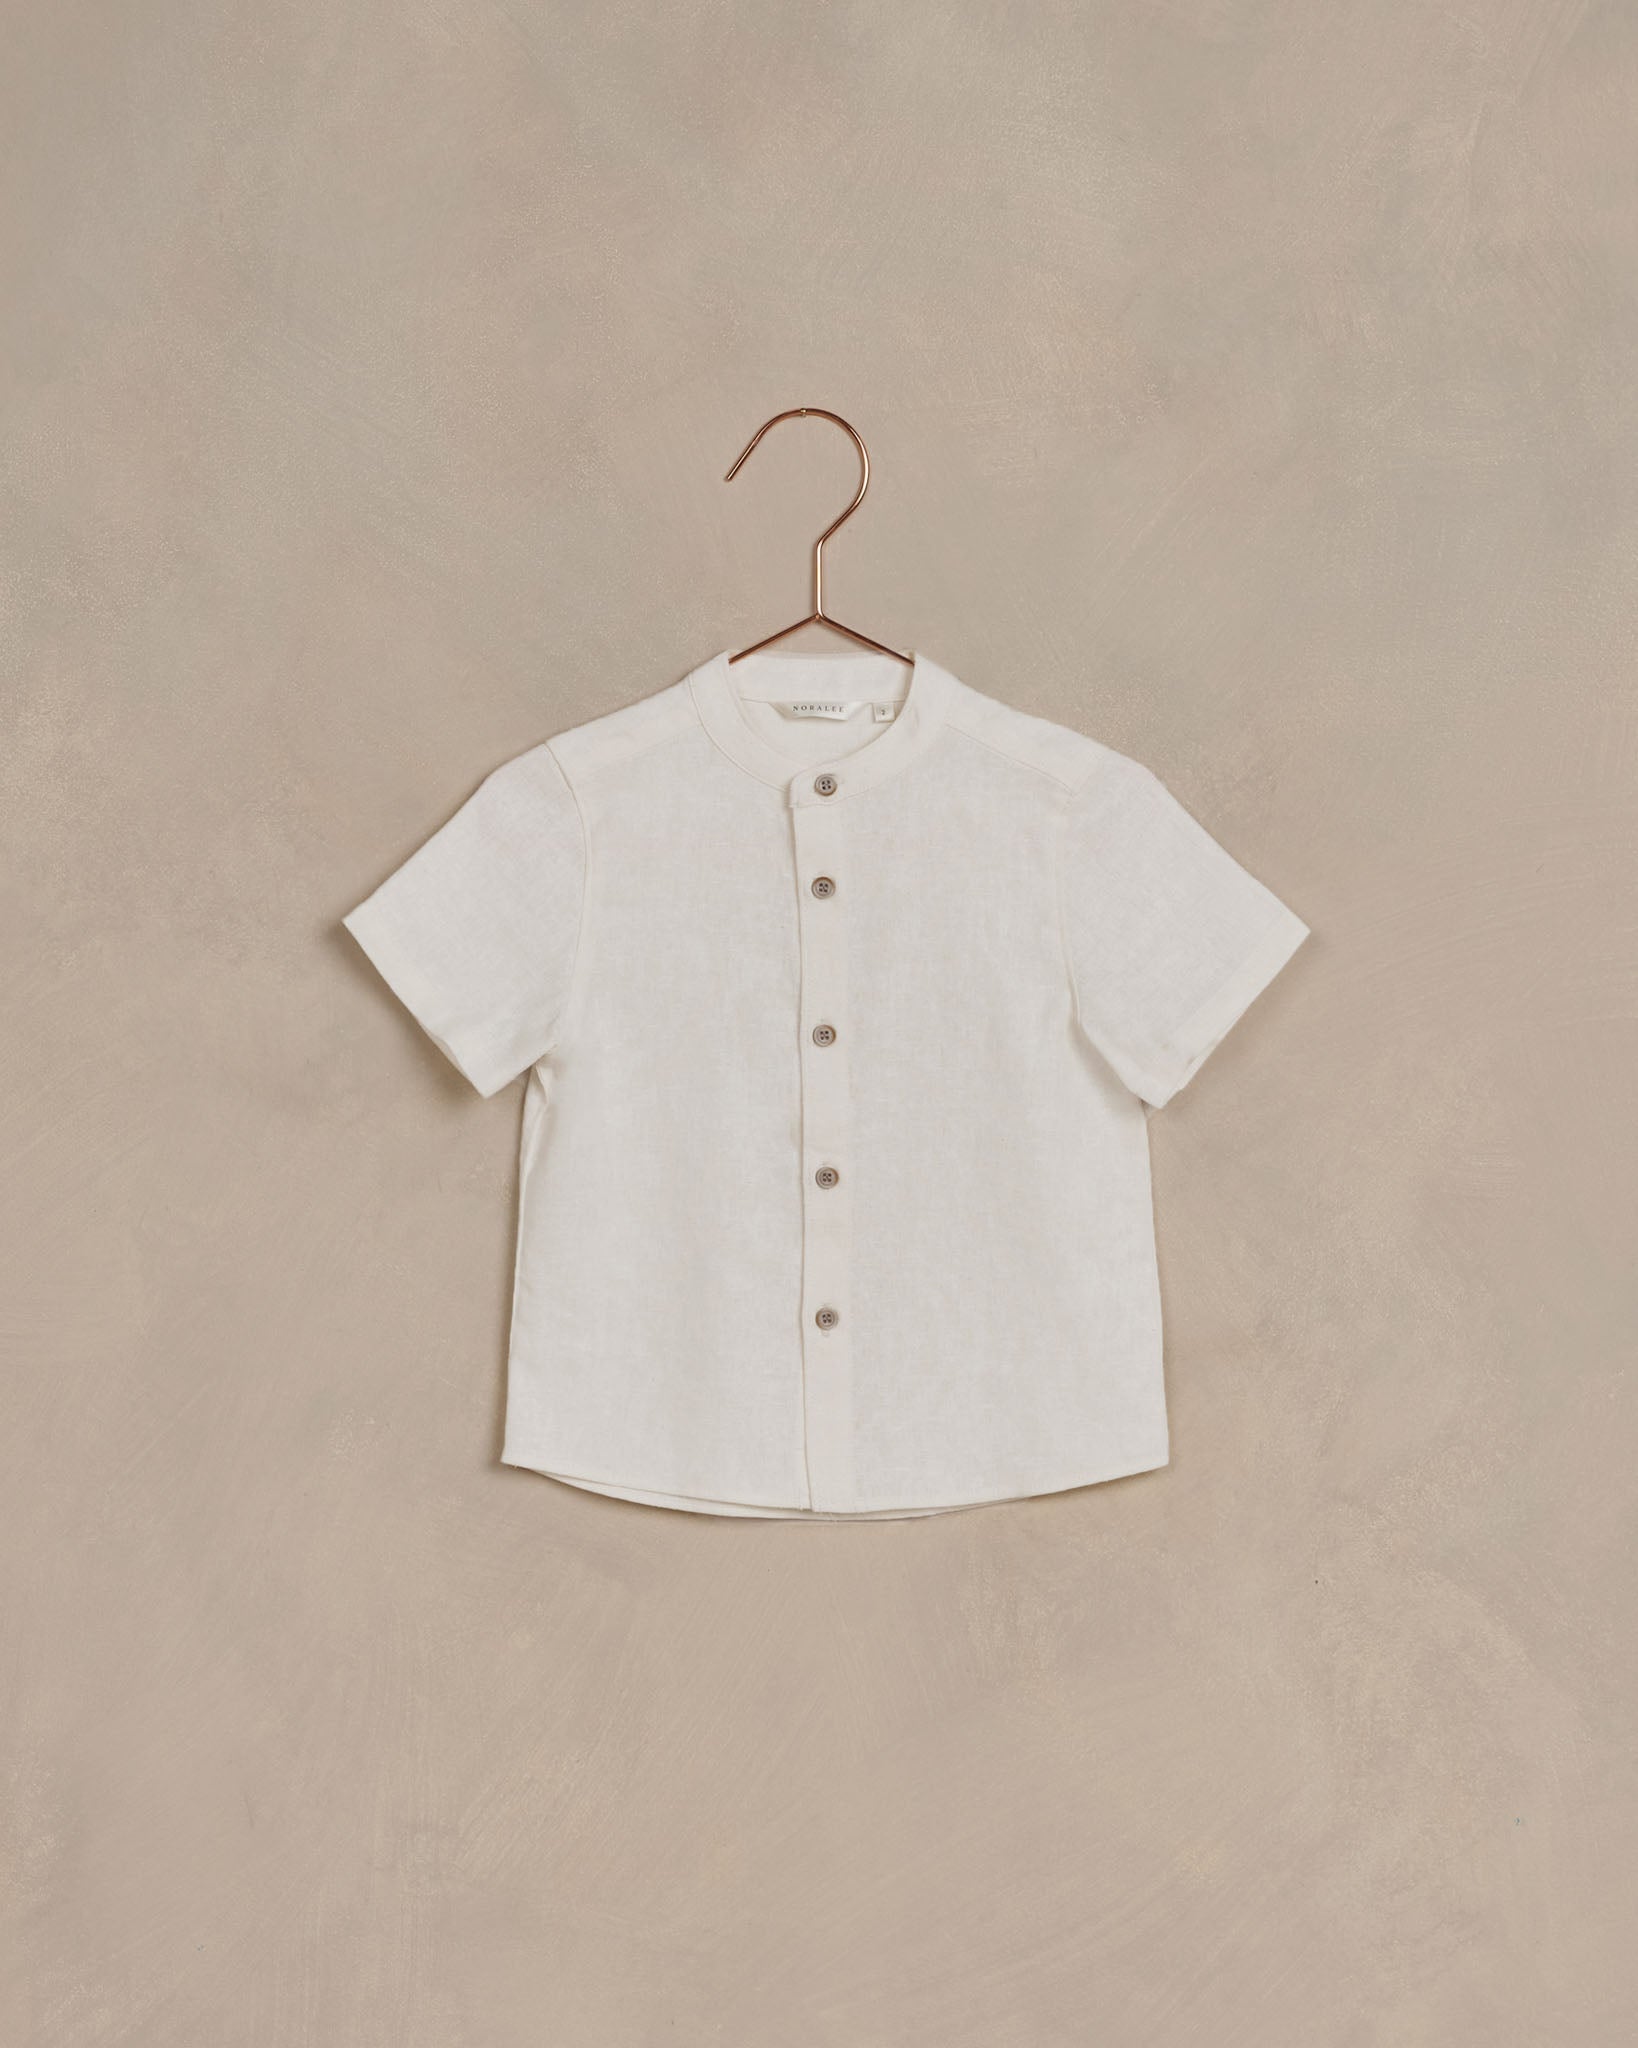 Archie Shirt || White - Rylee + Cru | Kids Clothes | Trendy Baby Clothes | Modern Infant Outfits |